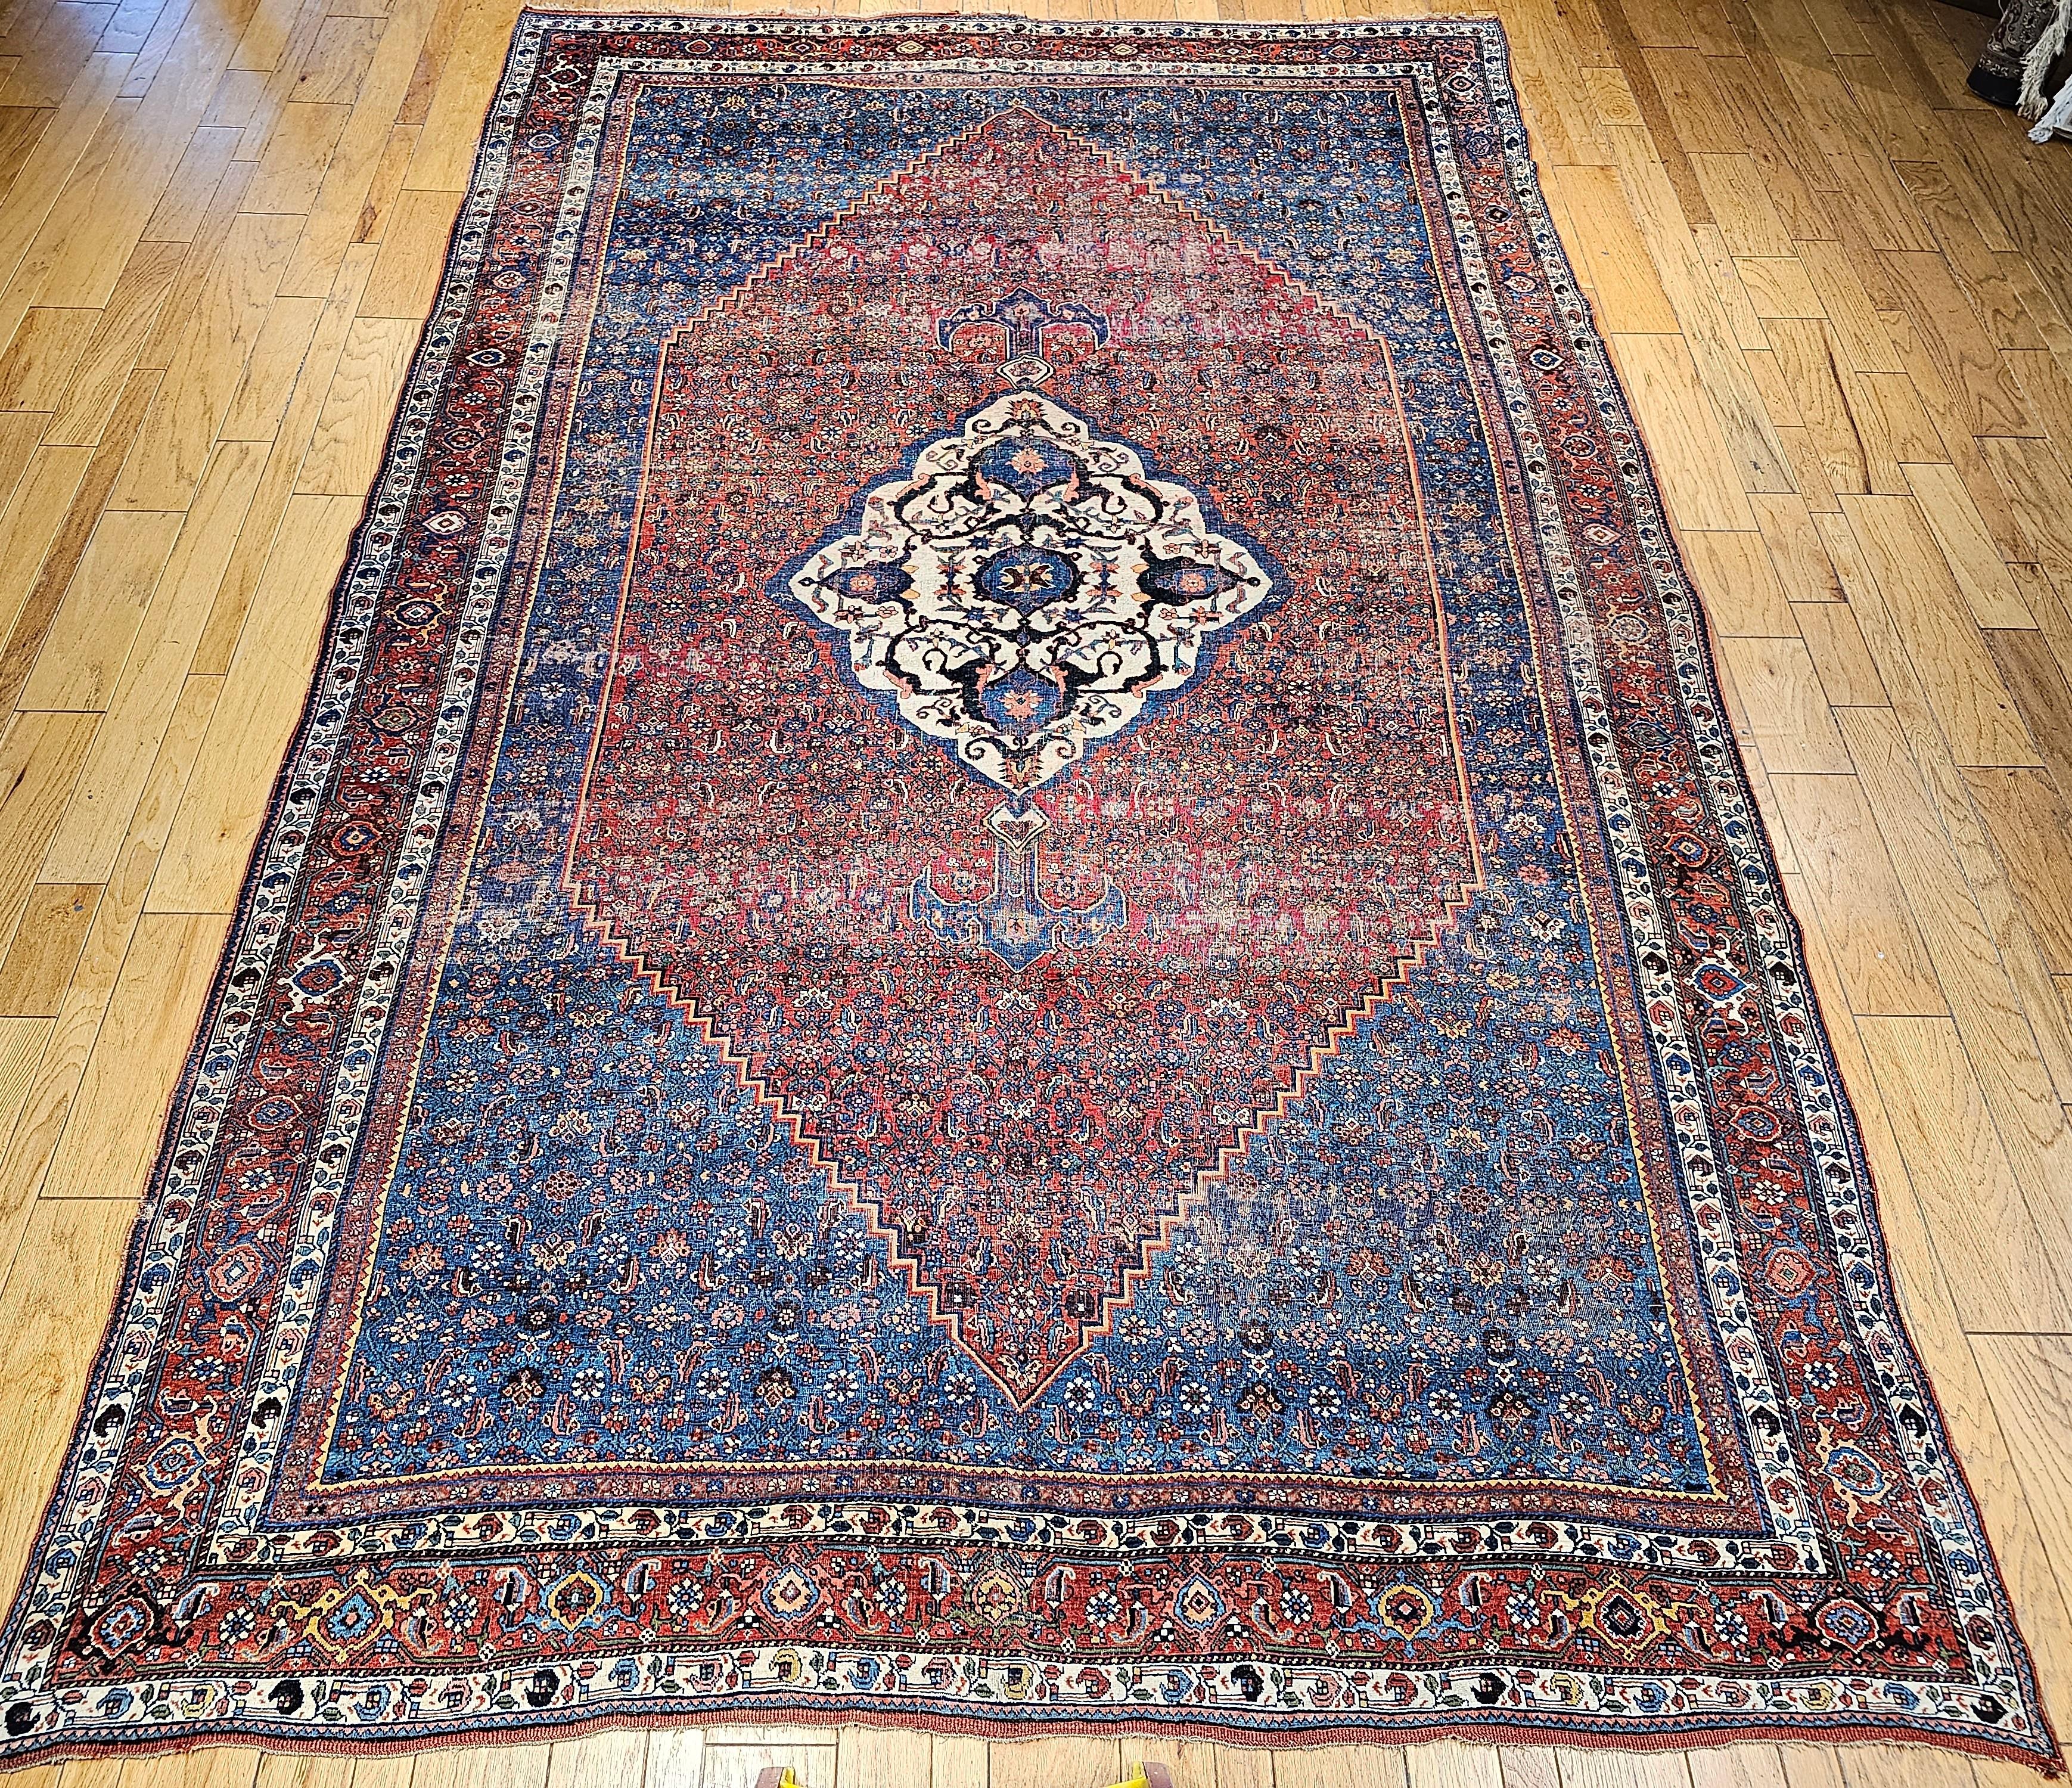 Beautiful oversized Persian Bidjar  rug is a great example of the art of Persian rug weaving from the last quarter of the 1800s. The Bidjar (Bijar) rug is a very unique and extremely desirable “Herati pattern” field in an abrash antique French blue